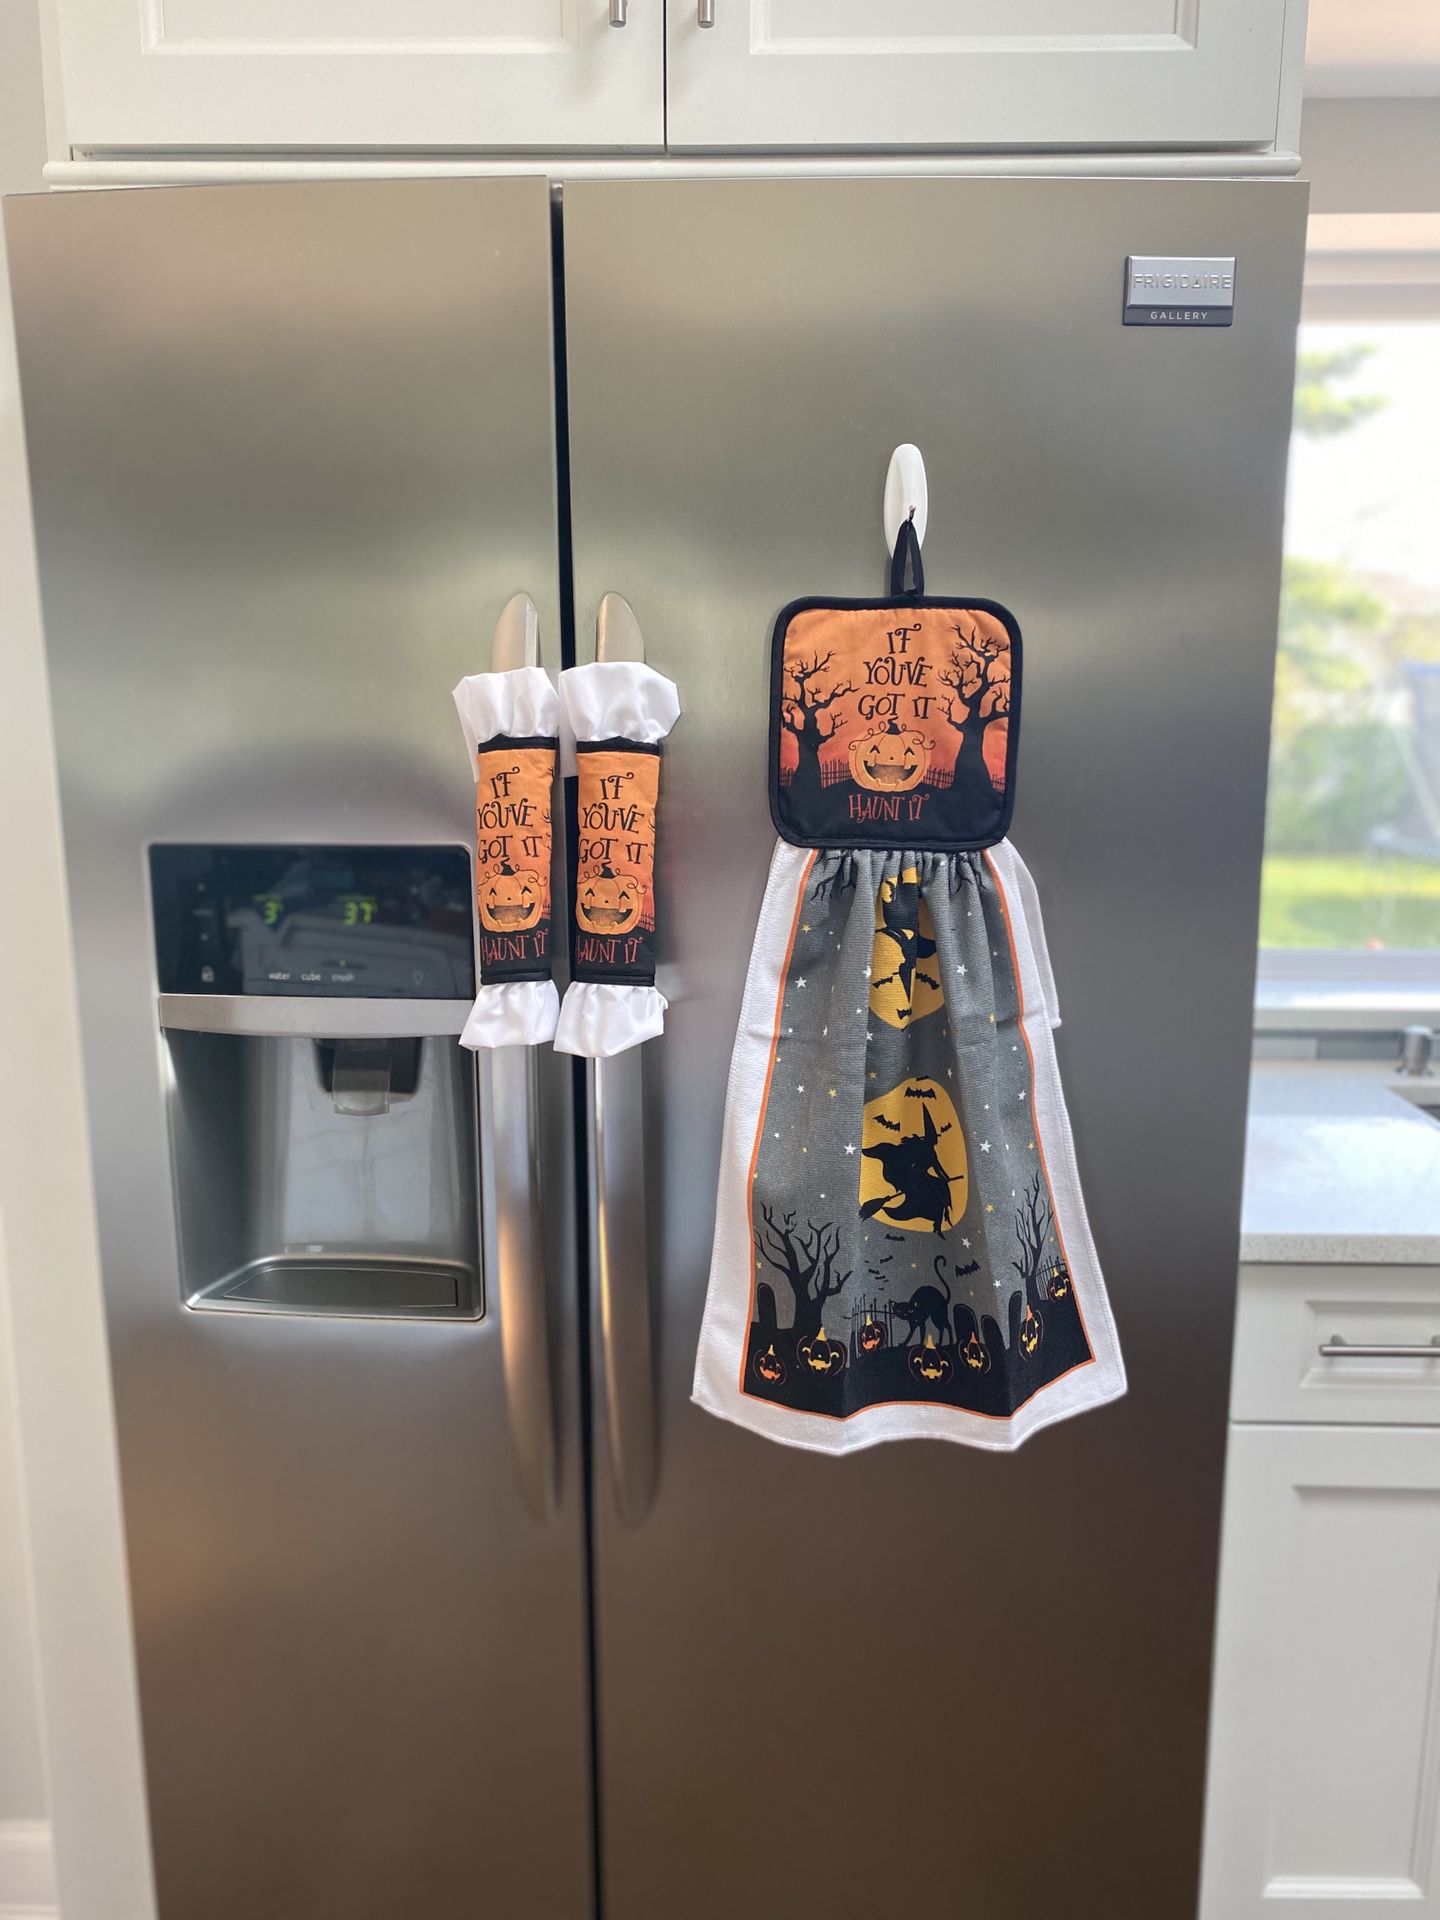 Kitchen towel with decorative pot holders.